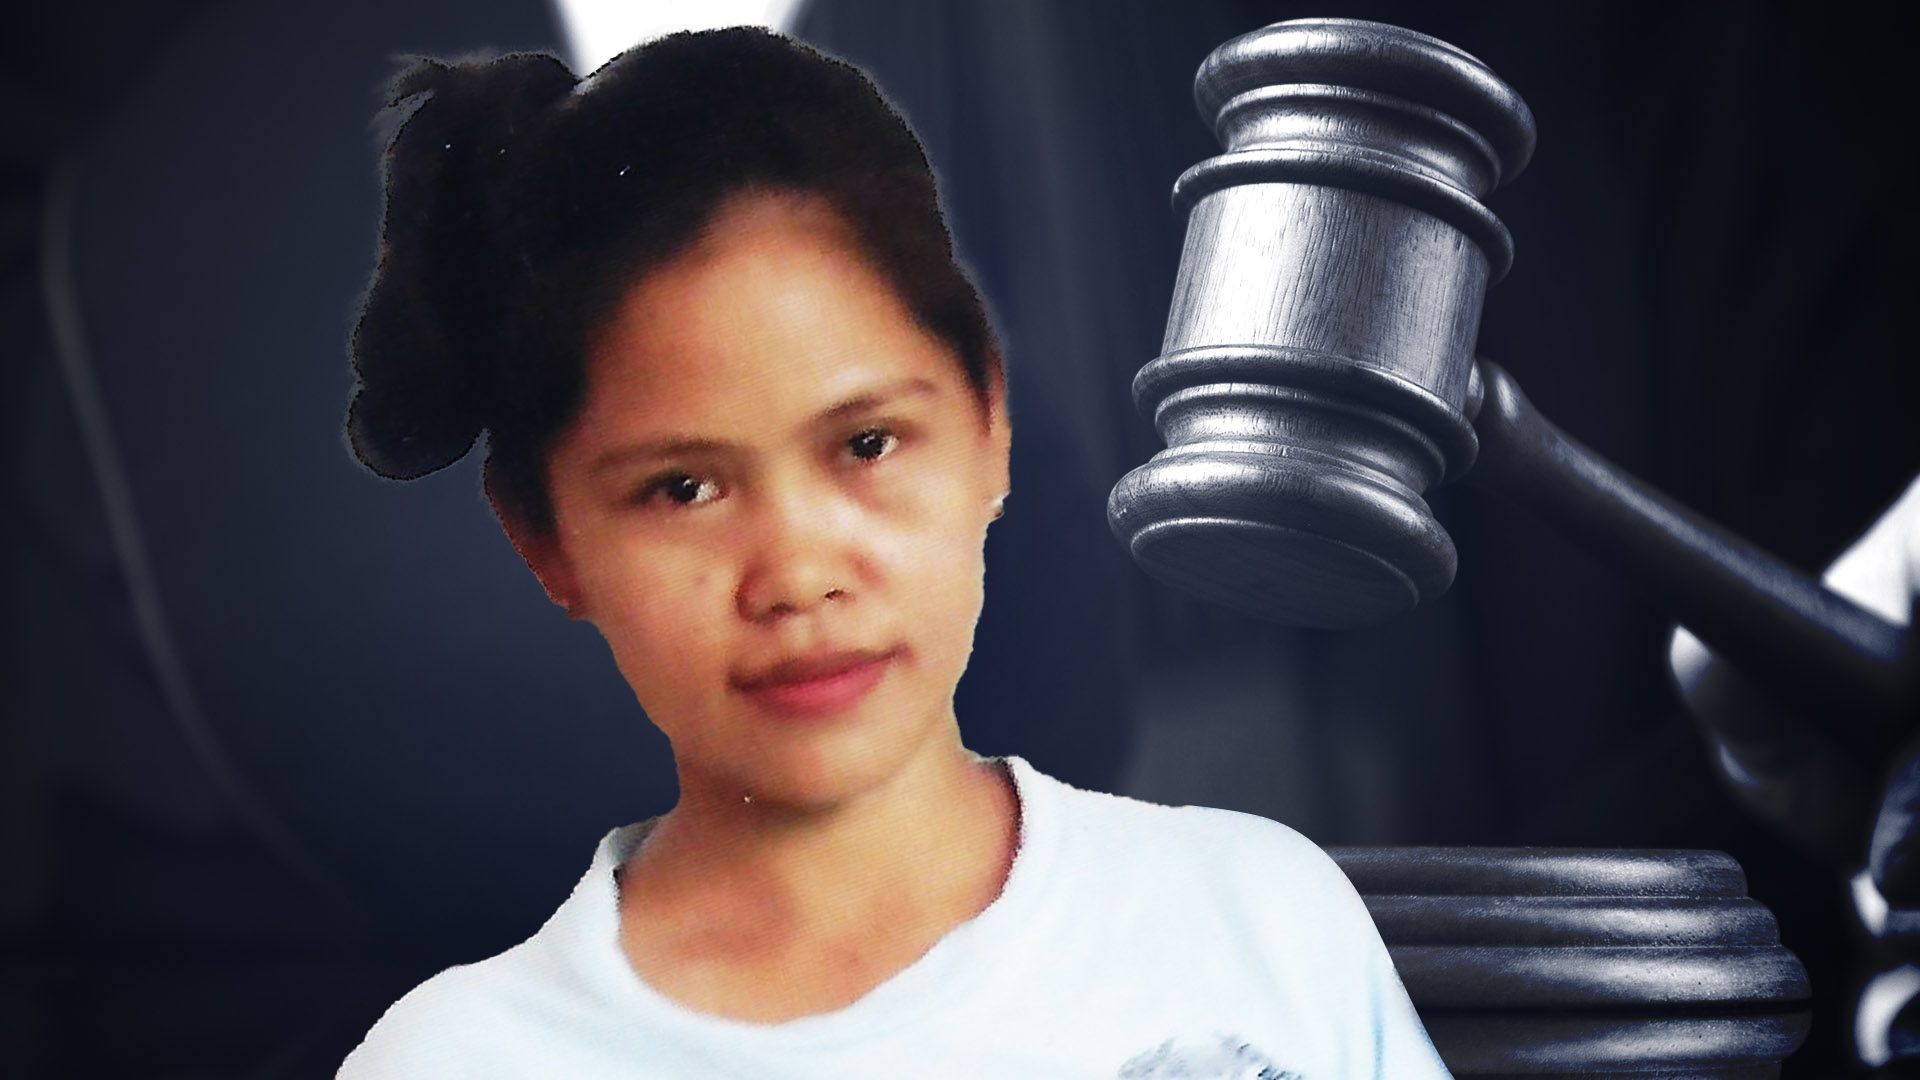 SC decision on Mary Jane Veloso’s deposition good news, says lawyer